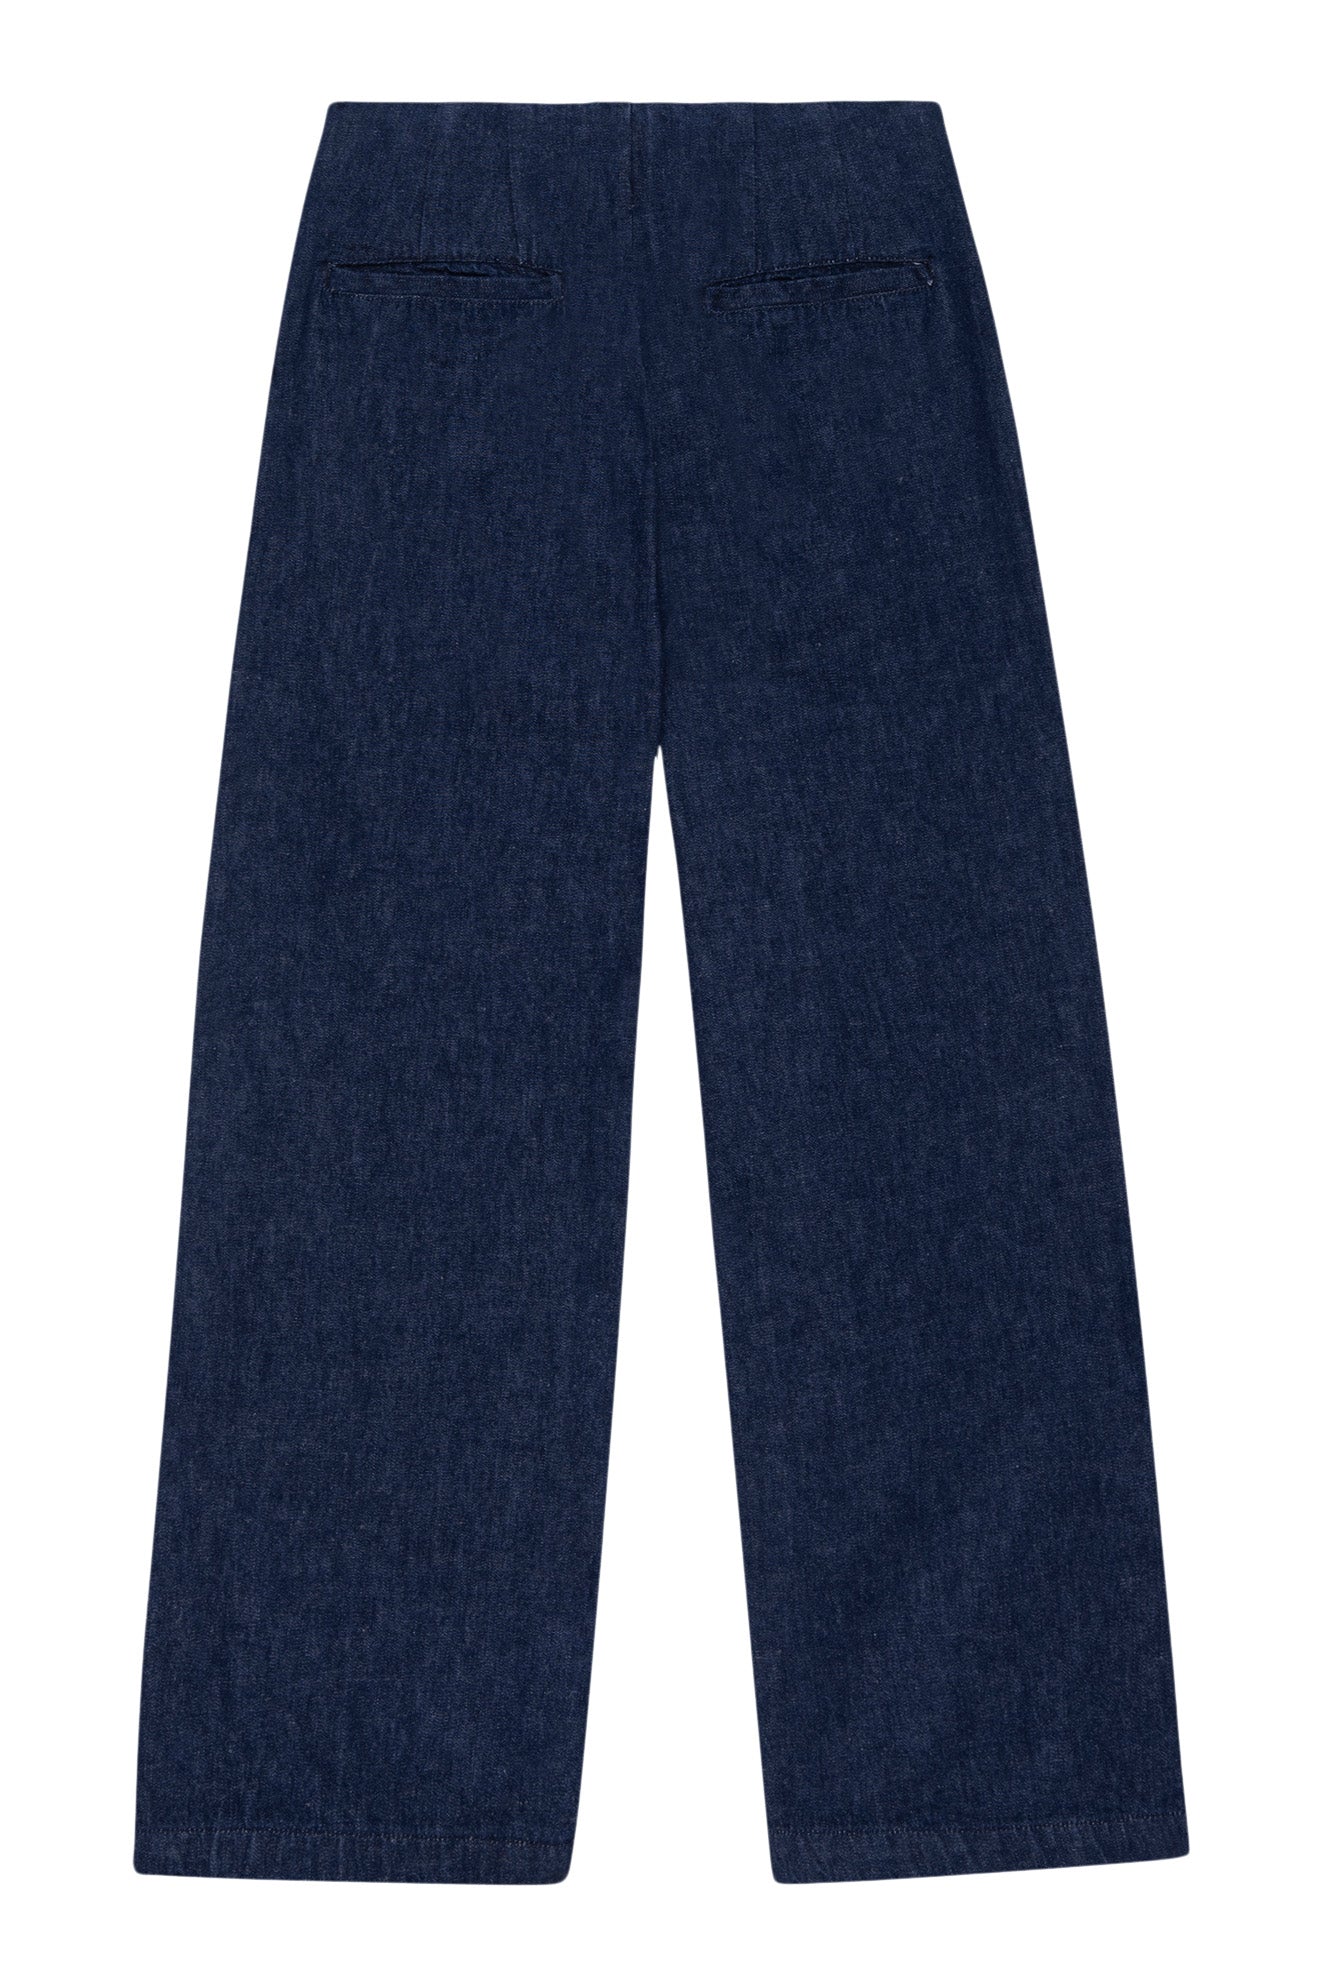 The Great Sculpted Trouser in Rinse Wash